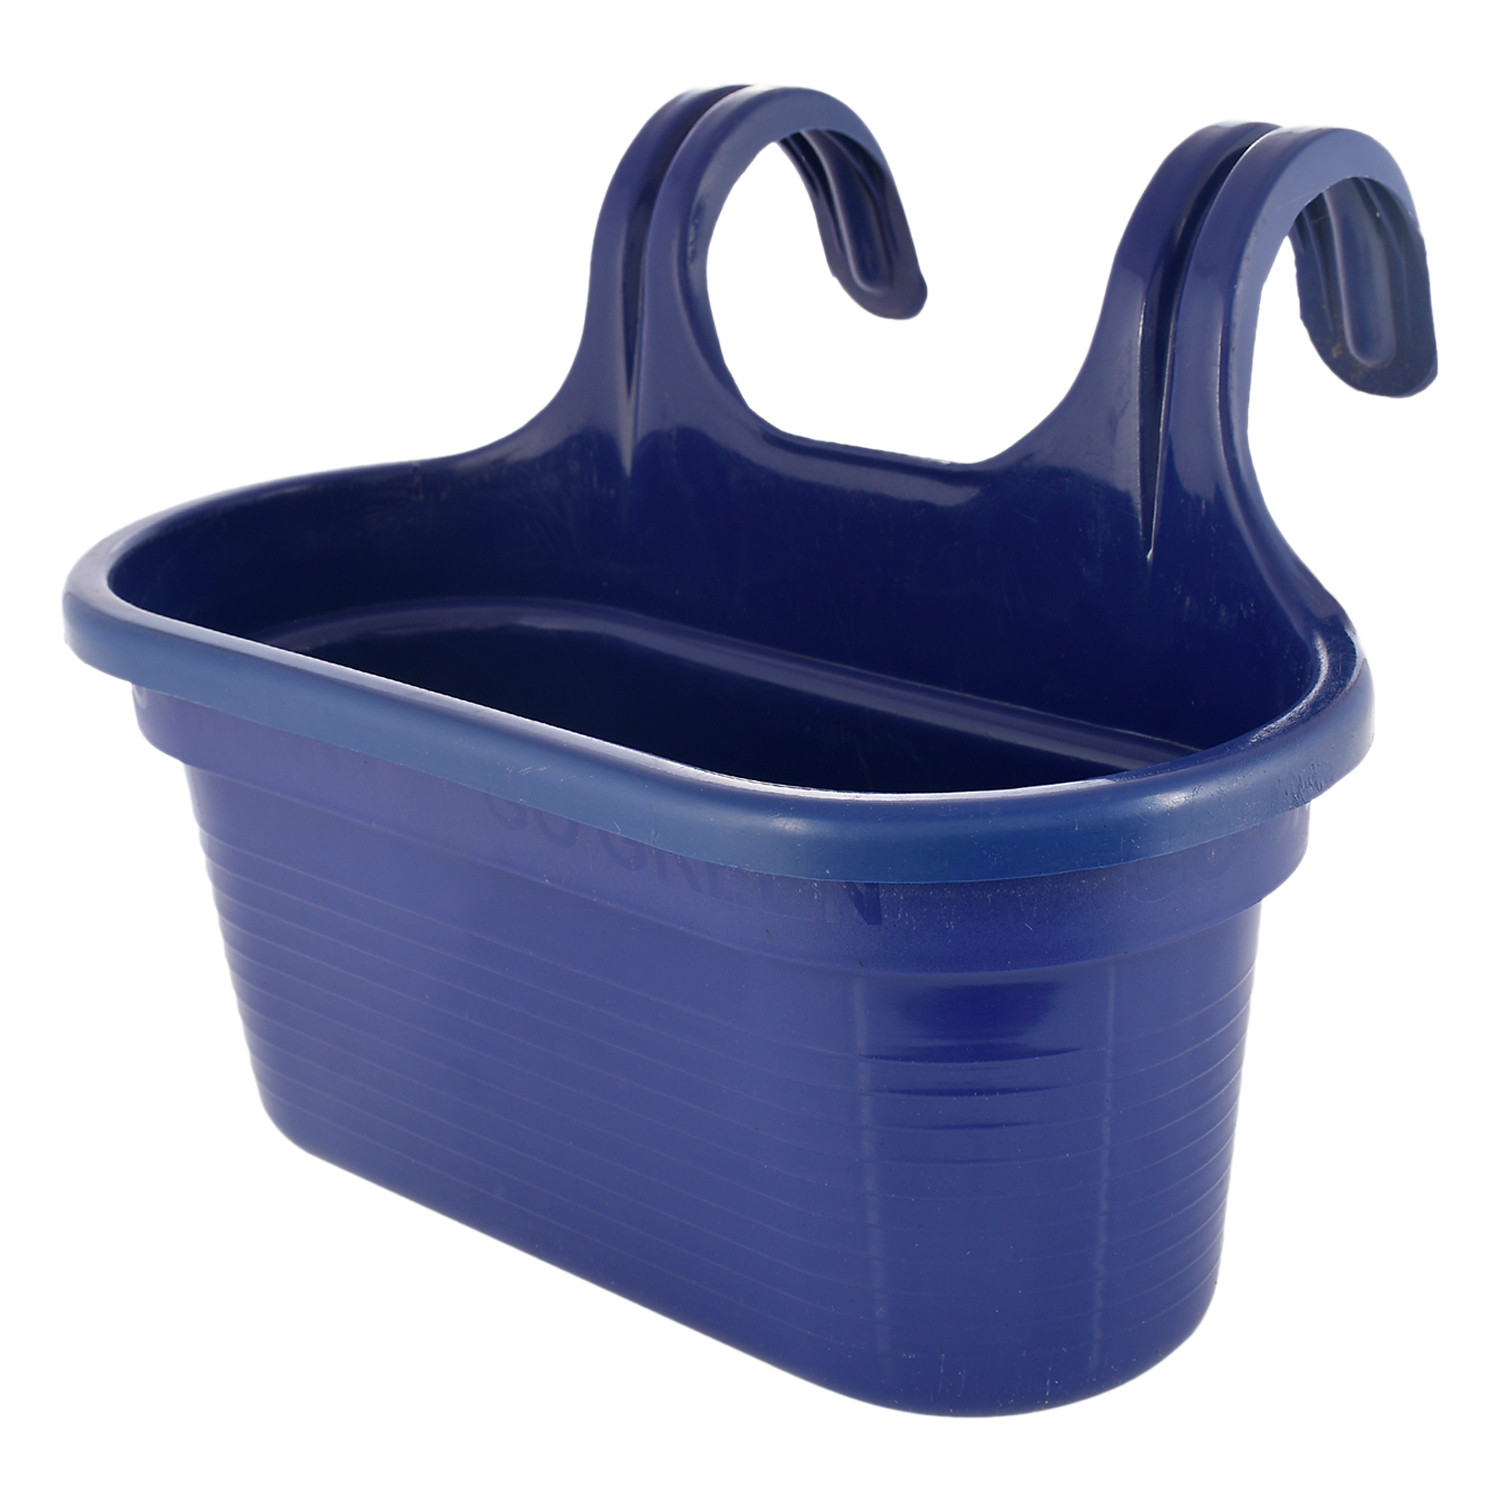 Kuber Industries Hanging Flower Pot|Double Hook Plant Container|Durable Plastic Glossy Finish Pots for Home|Balcony|Garden|12 Inch|Pack of 2 (Blue & Yellow)